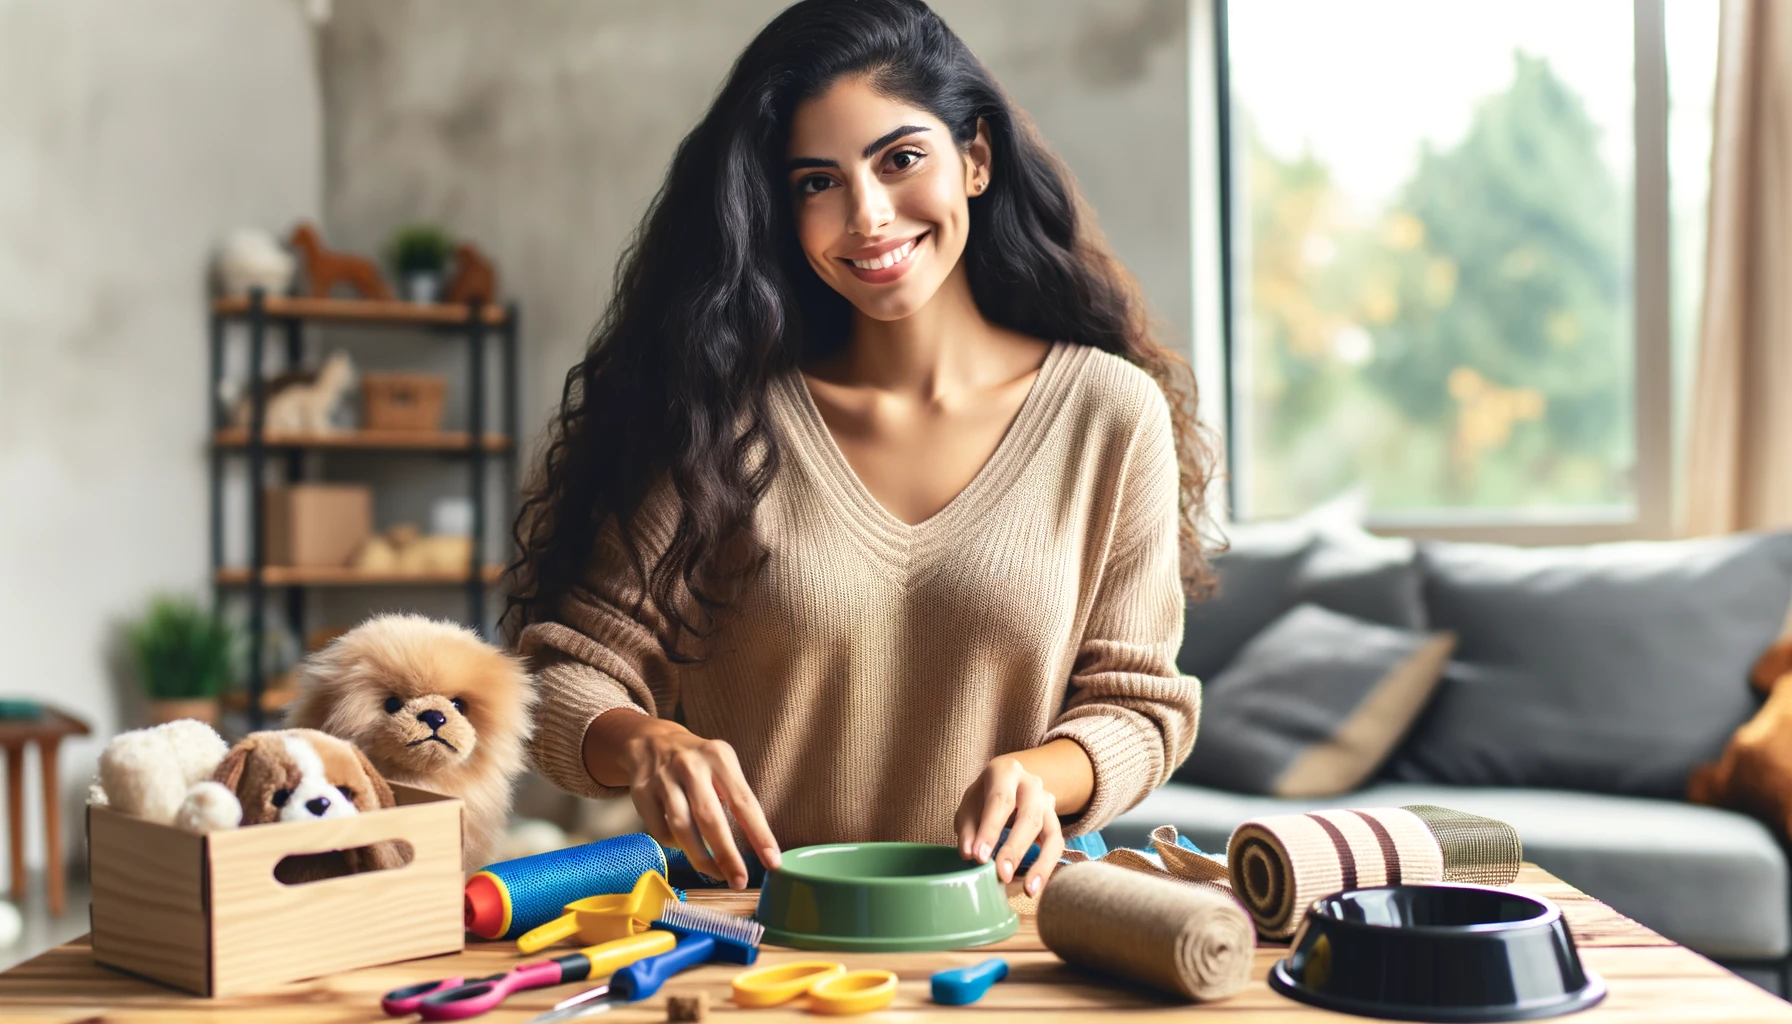 A realistic photograph of a Latina woman preparing pet supplies at home. The setting includes various pet-related items like food bowls, toys, and grooming tools on a table. The woman is smiling and organizing the supplies, creating a warm and inviting atmosphere.